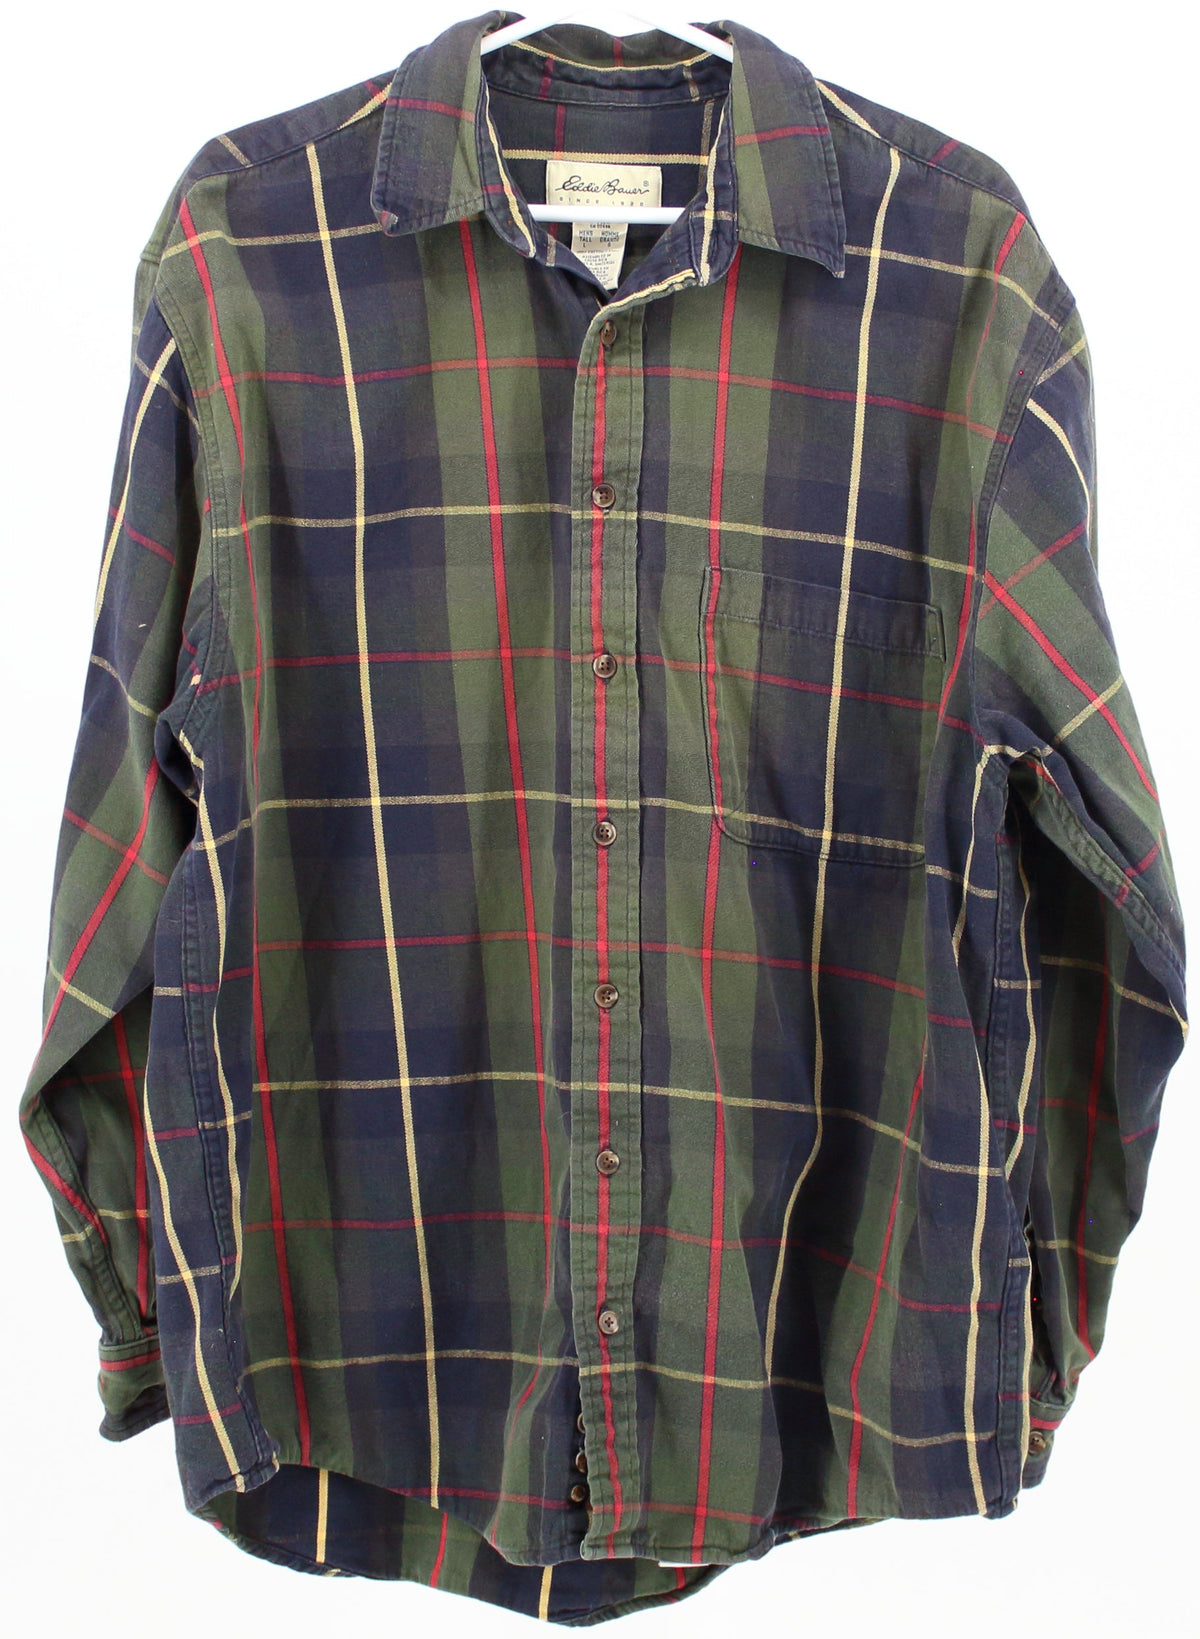 Eddie Bauer Green Navy Blue Red and Yellow Plaid Shirt